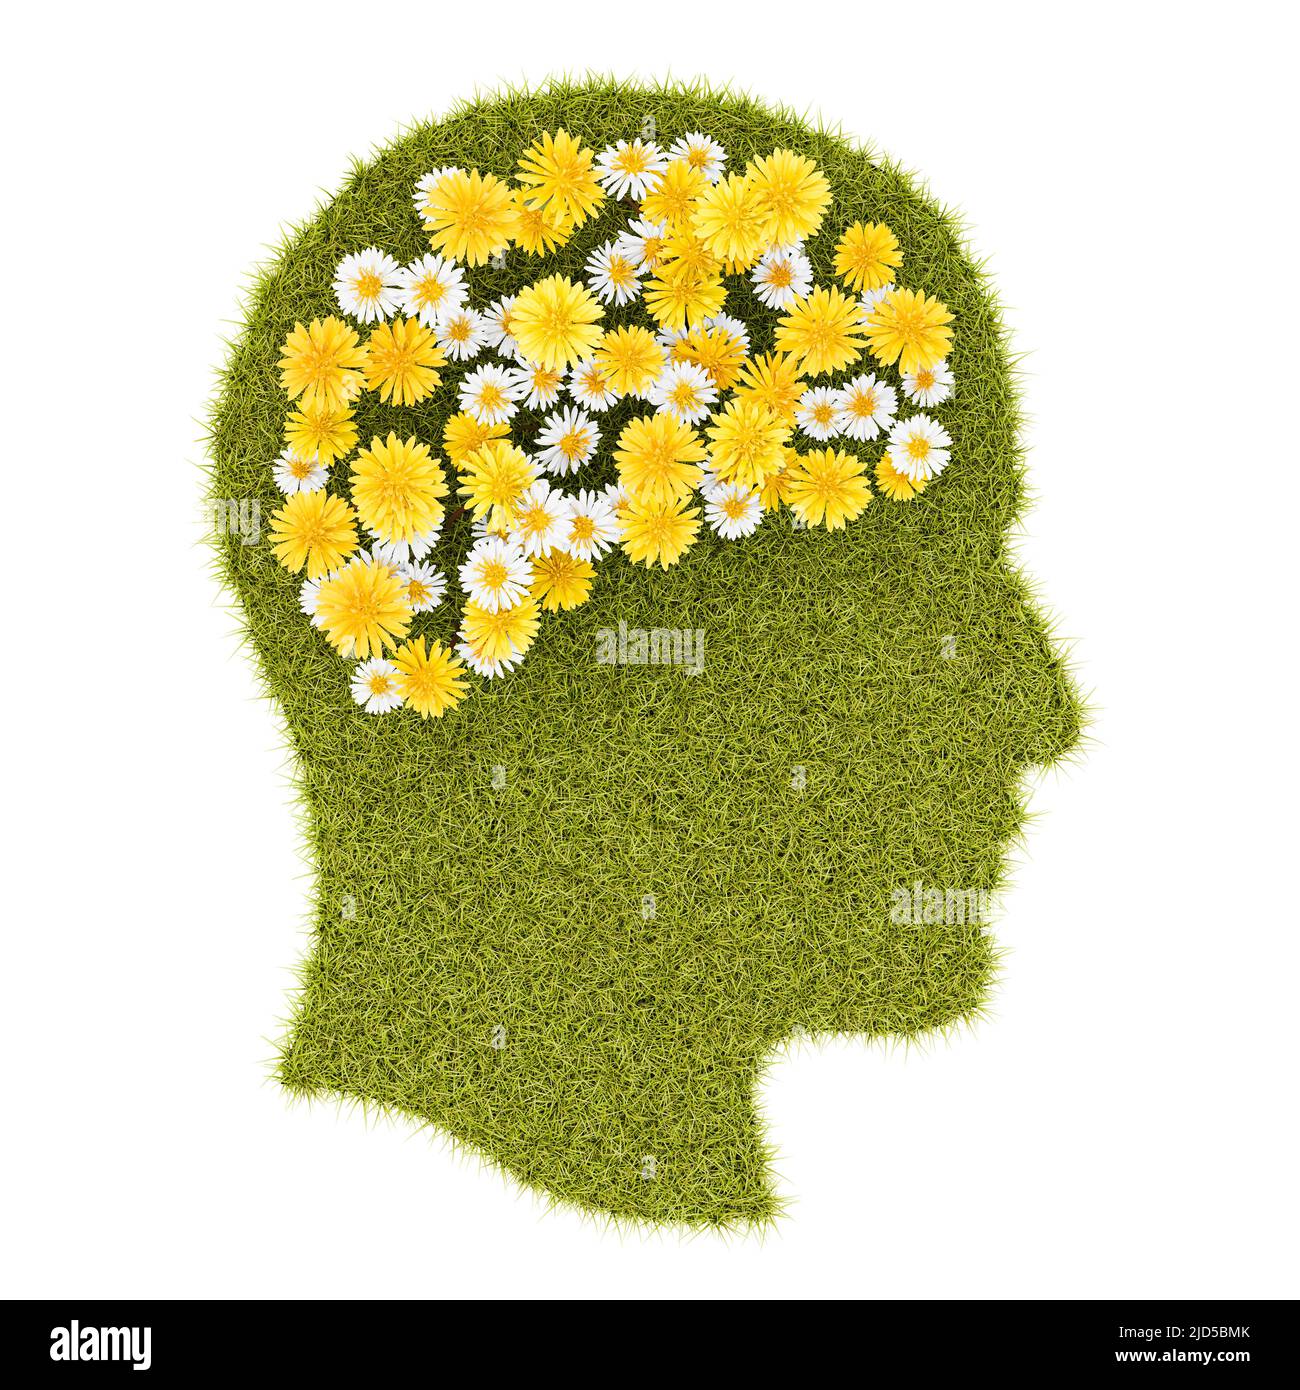 Flowery Grassy Human Head Profile with Flowers in the Shape of a Brain Stock Photo